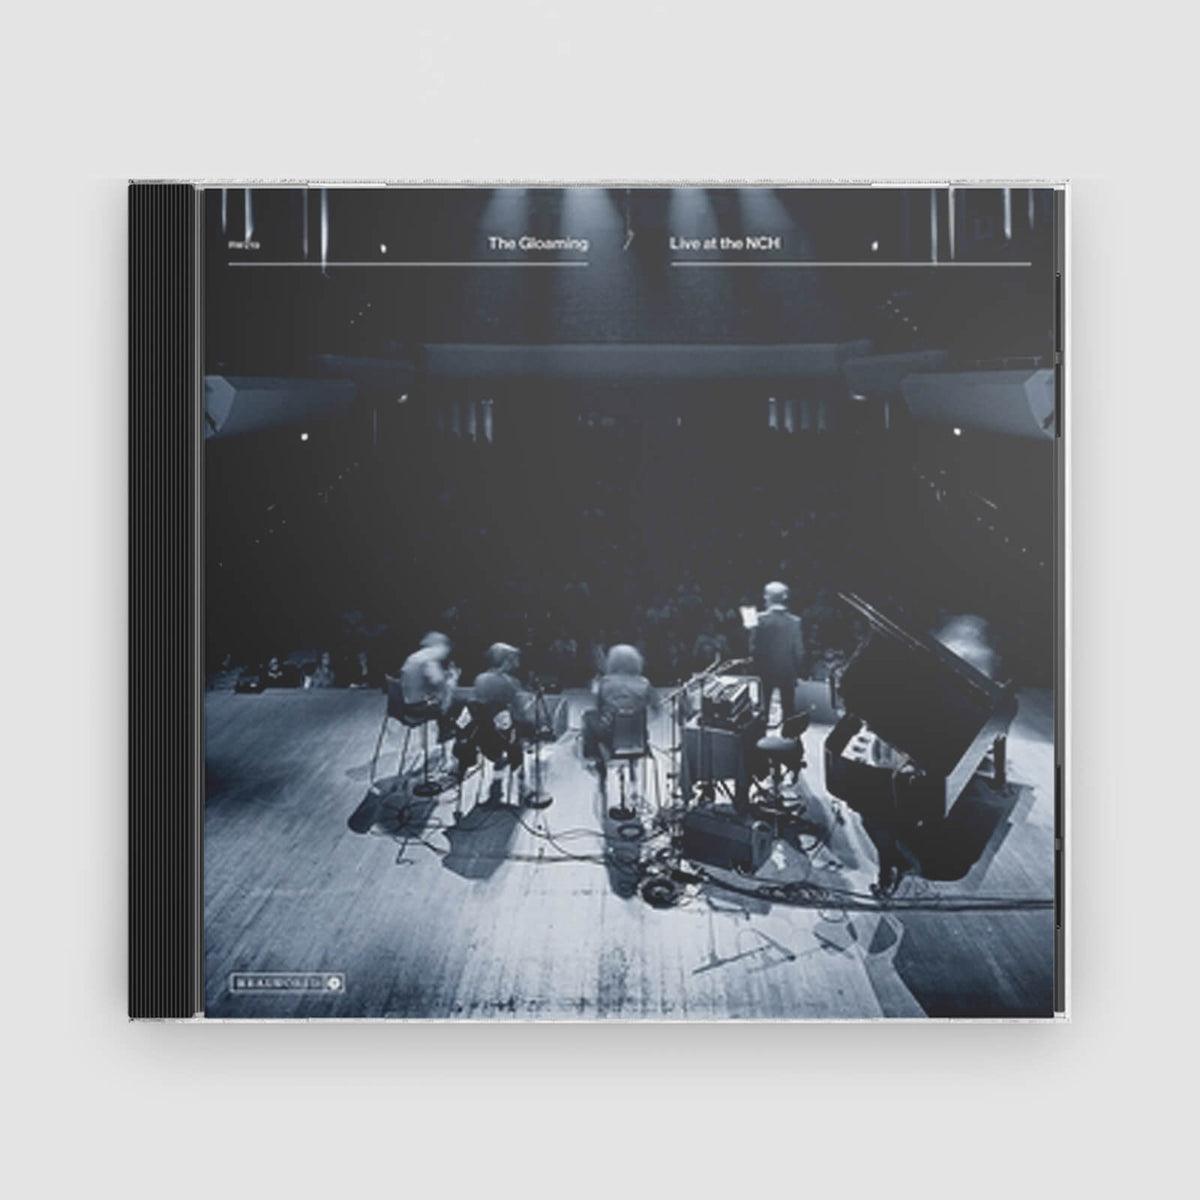 The Gloaming : Live at the NCH